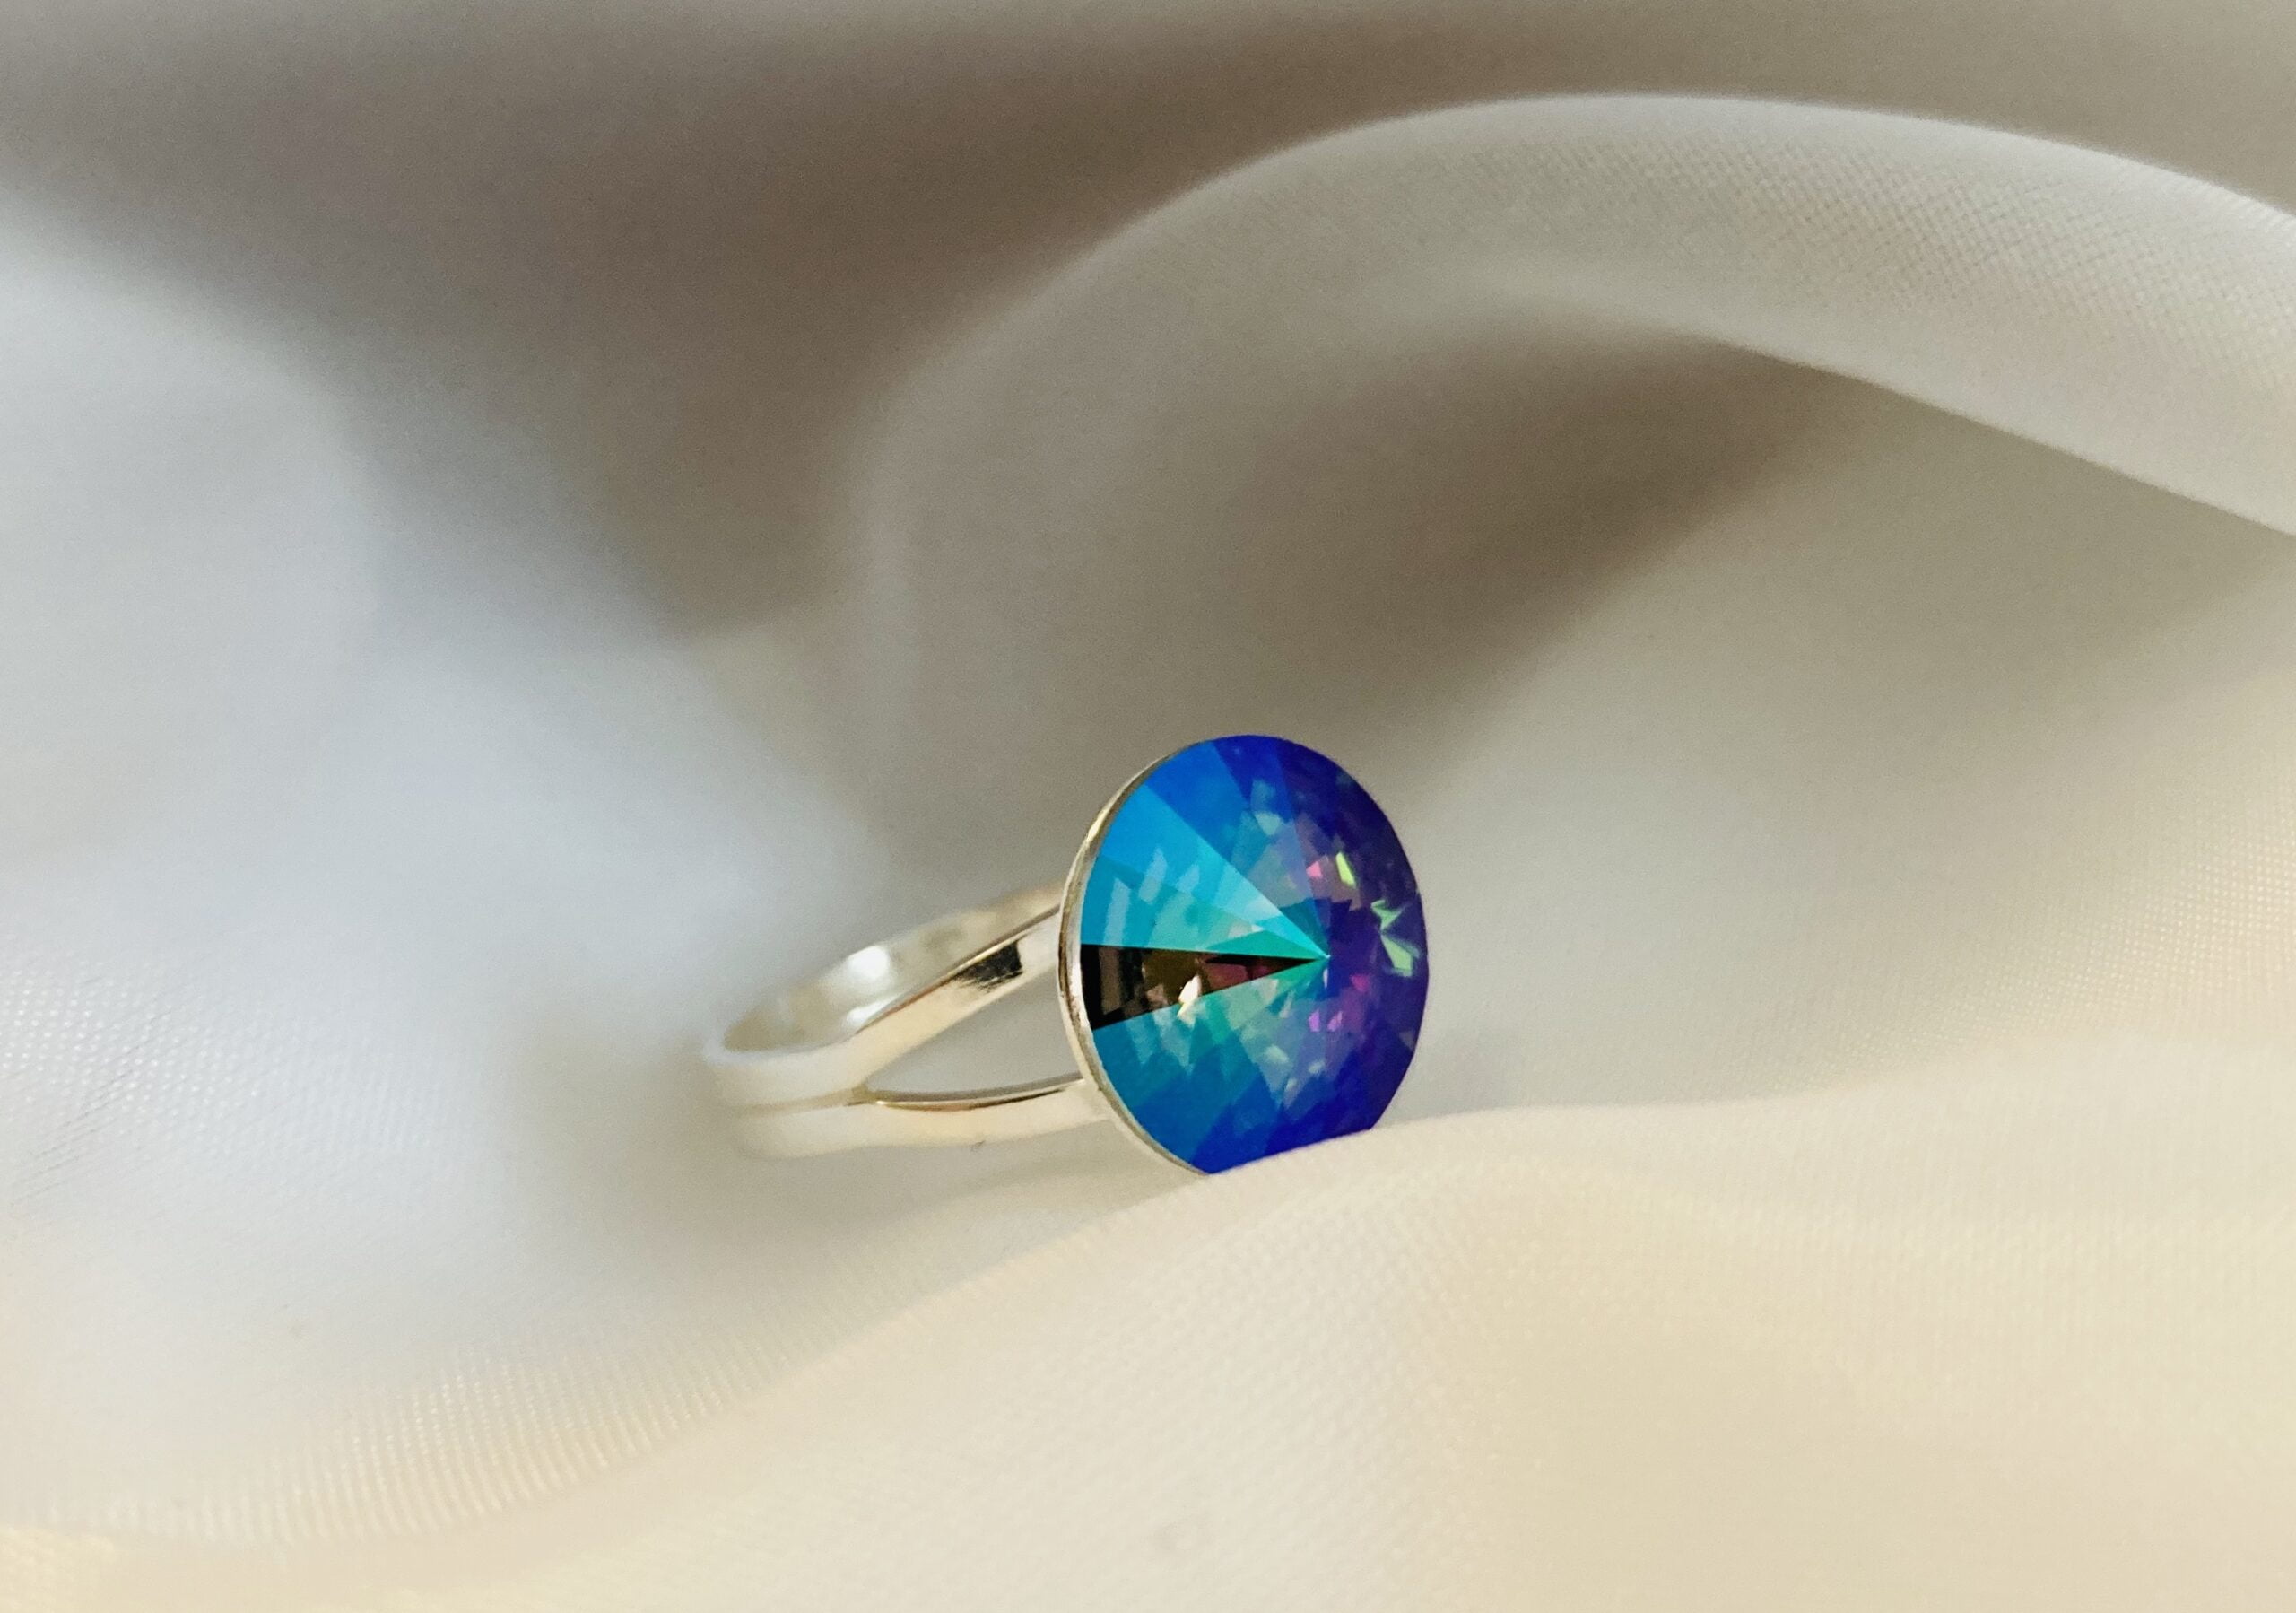 Orca Legacy, ocean conservation jewelry